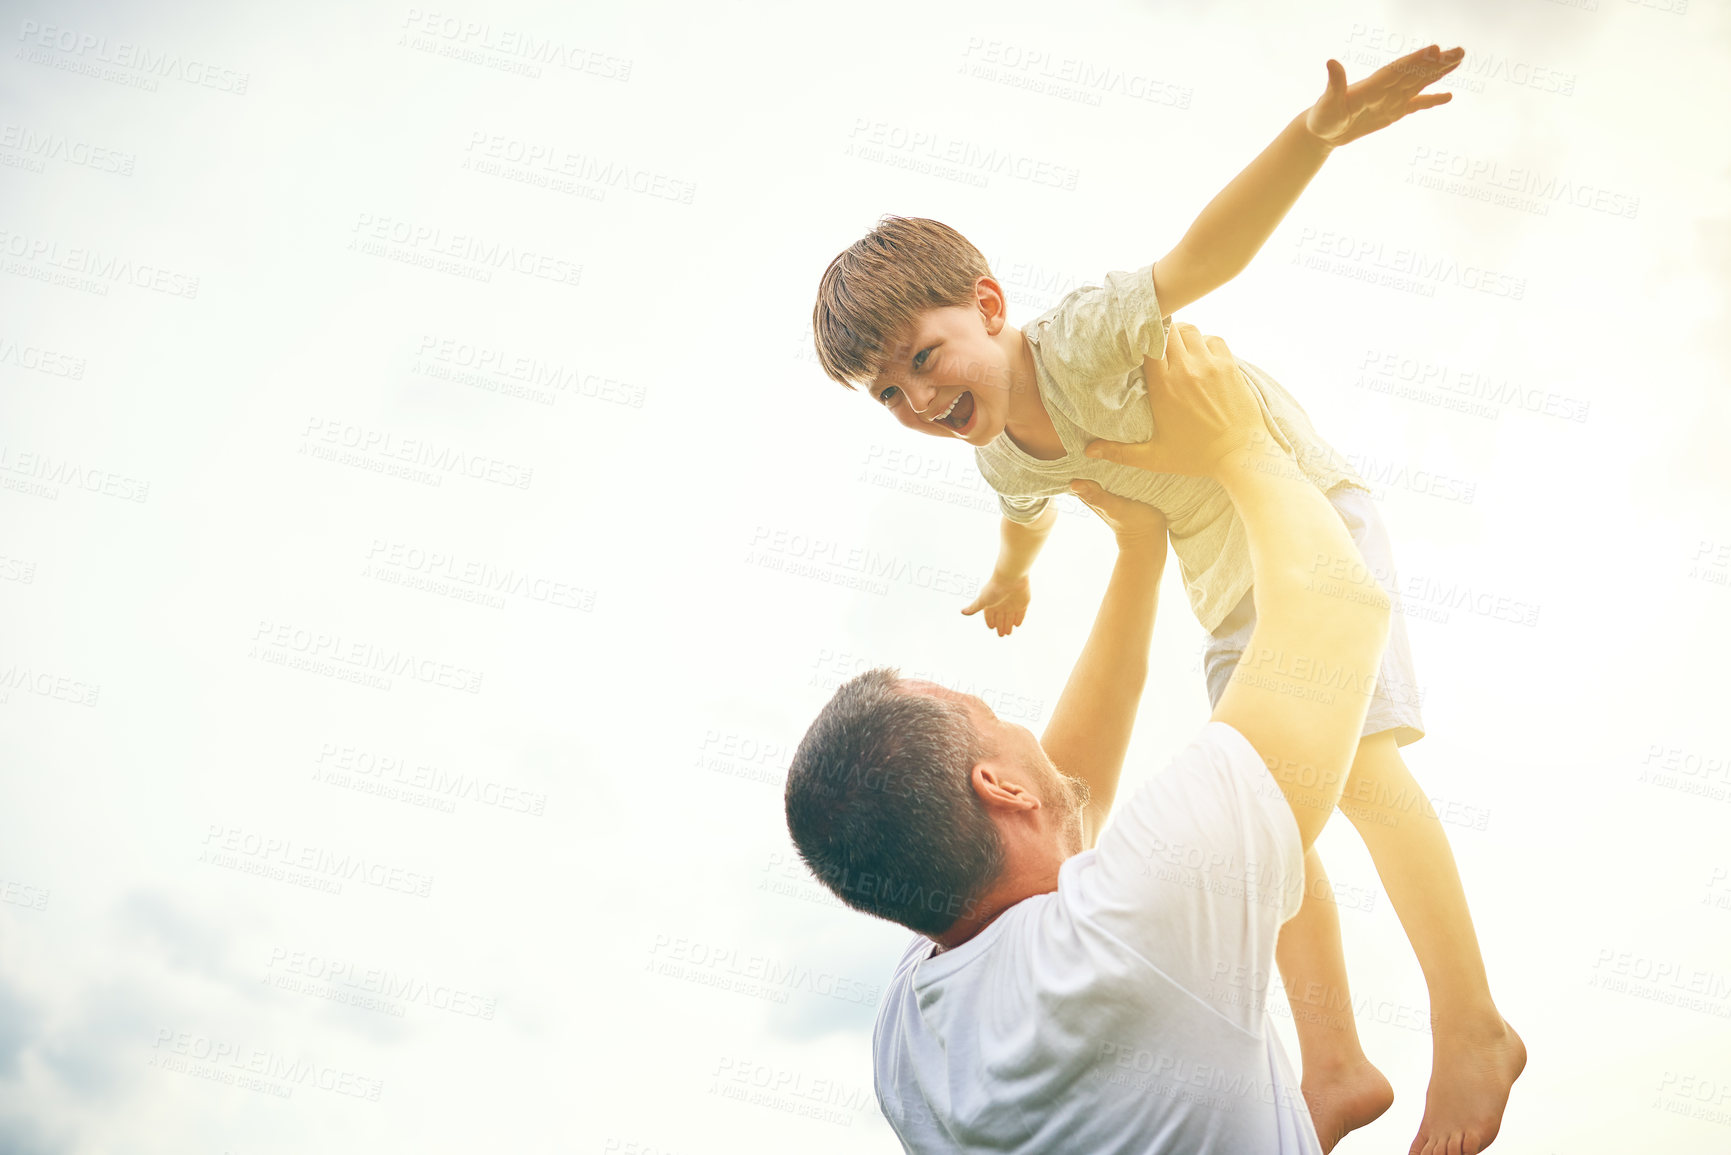 Buy stock photo Cropped shot of a father tossing his adorable son into the air outside